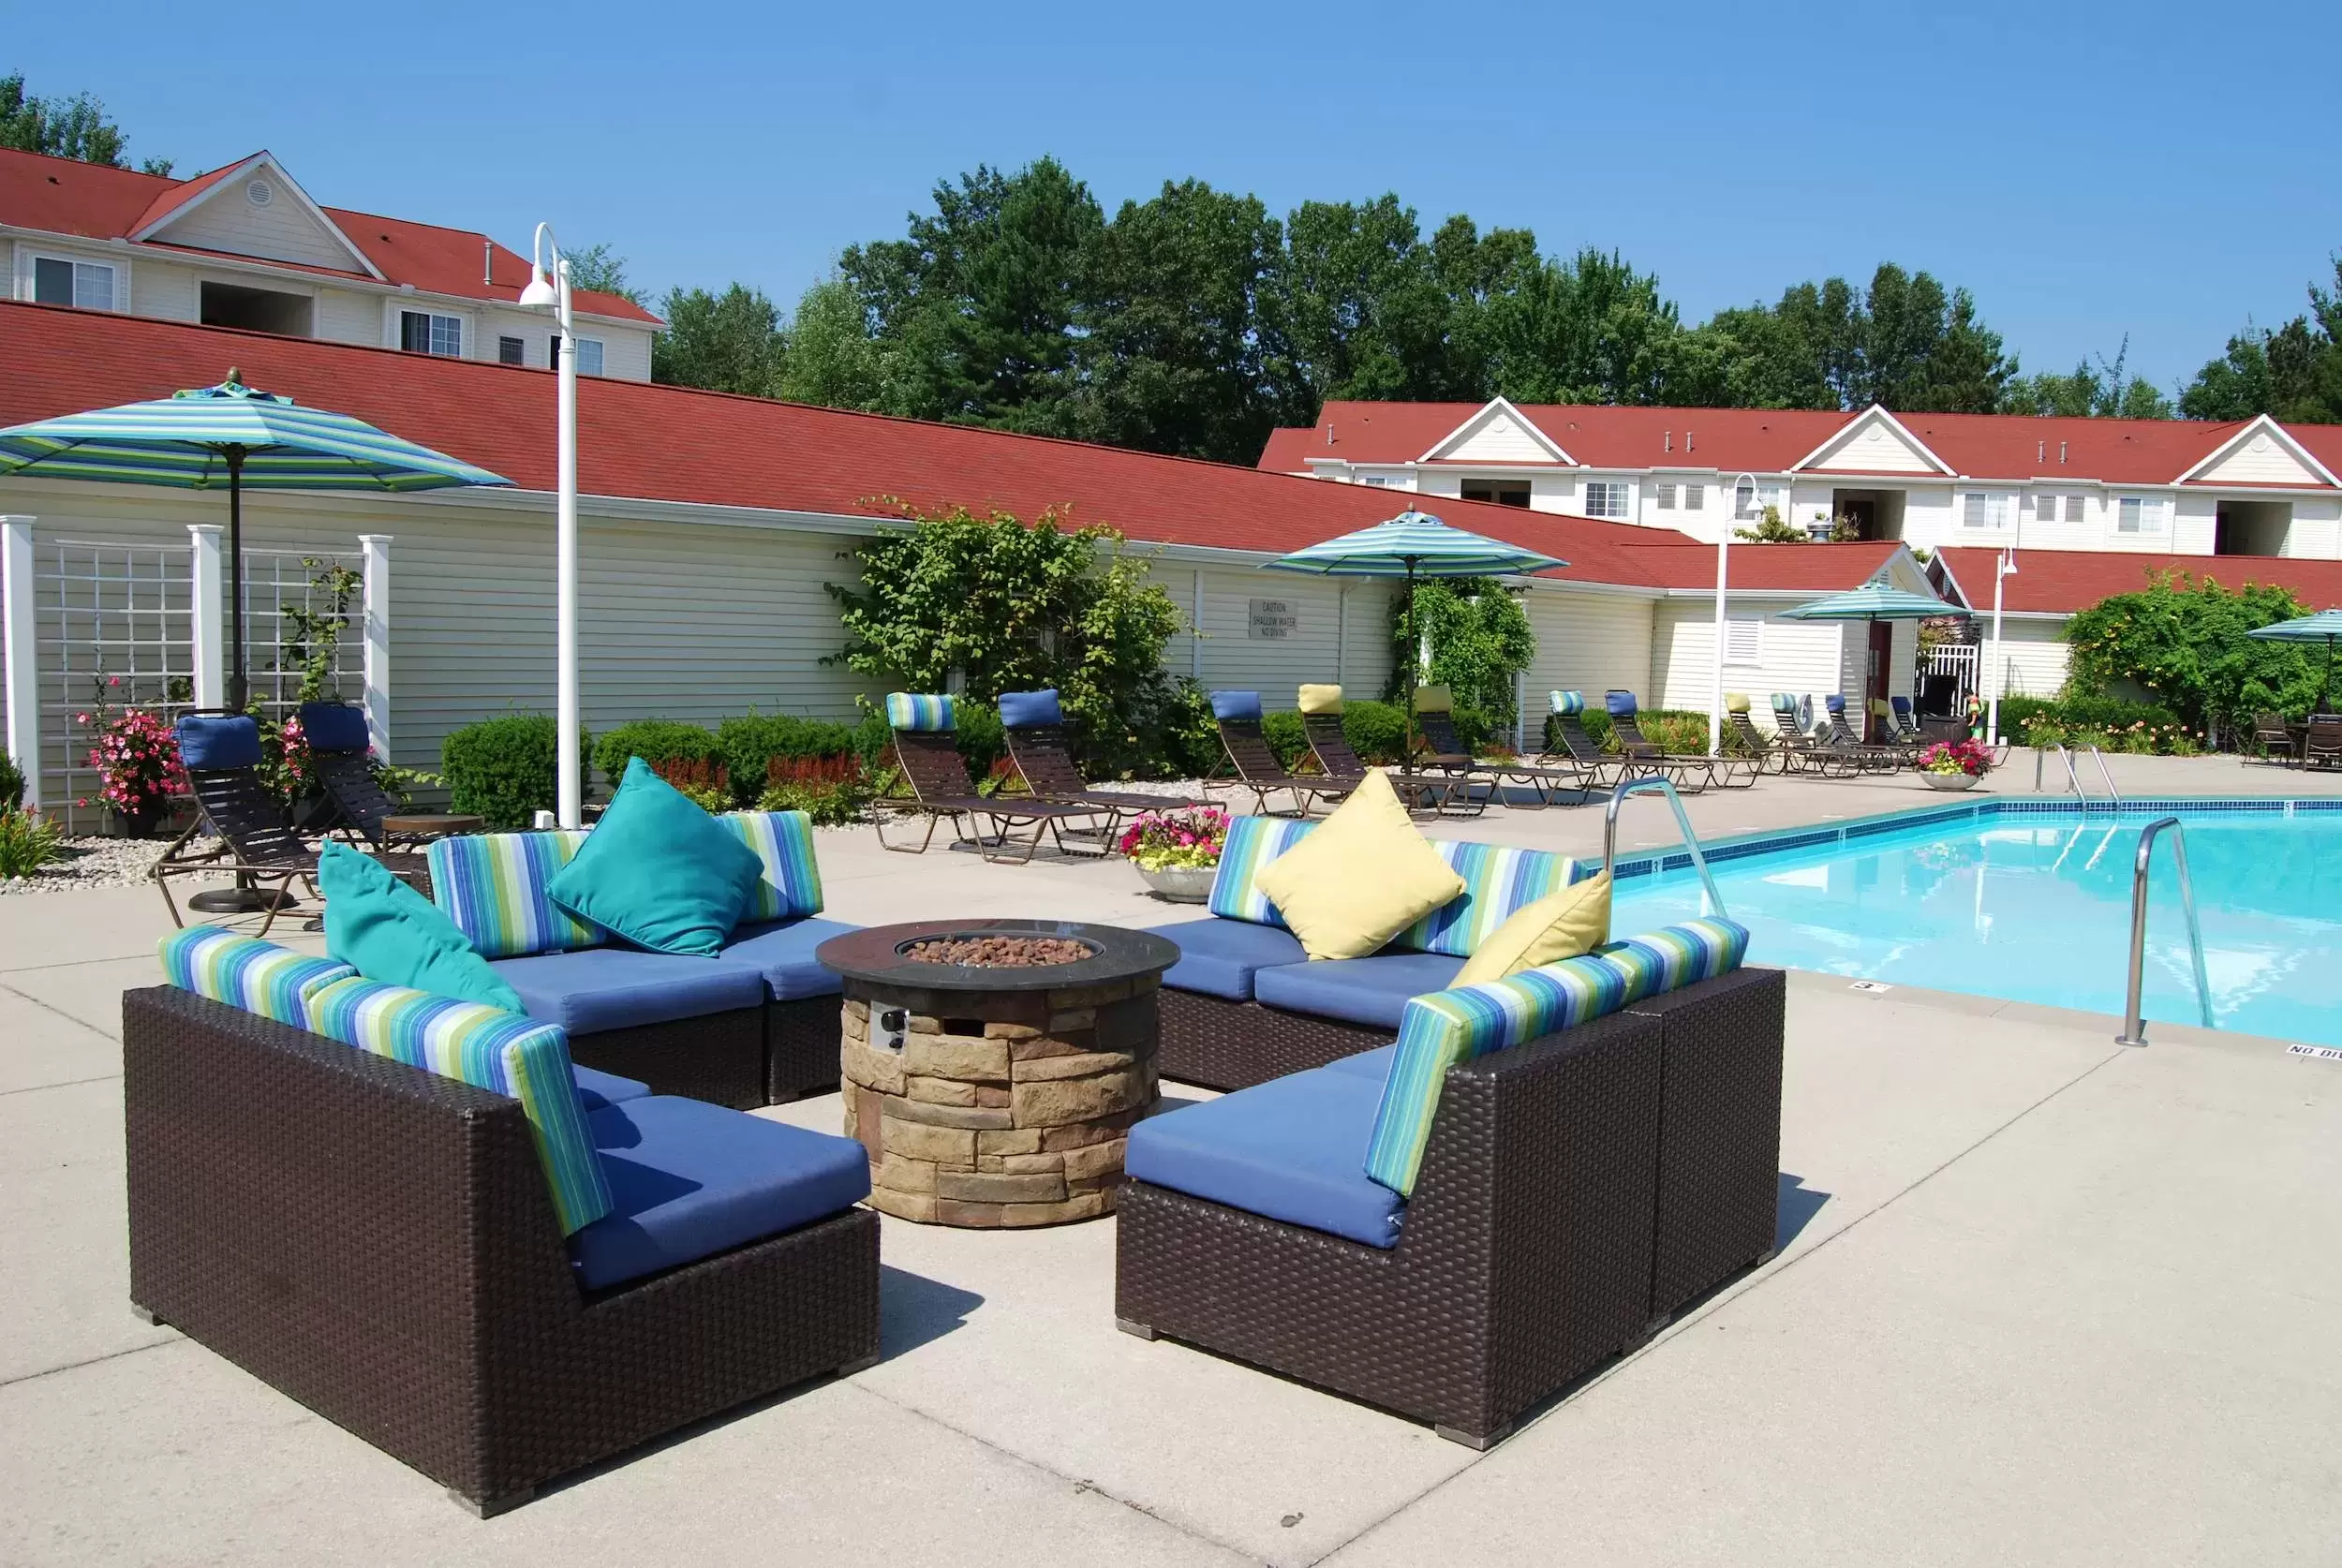 An outdoor seating area by the fire pit on the patio by the pool.